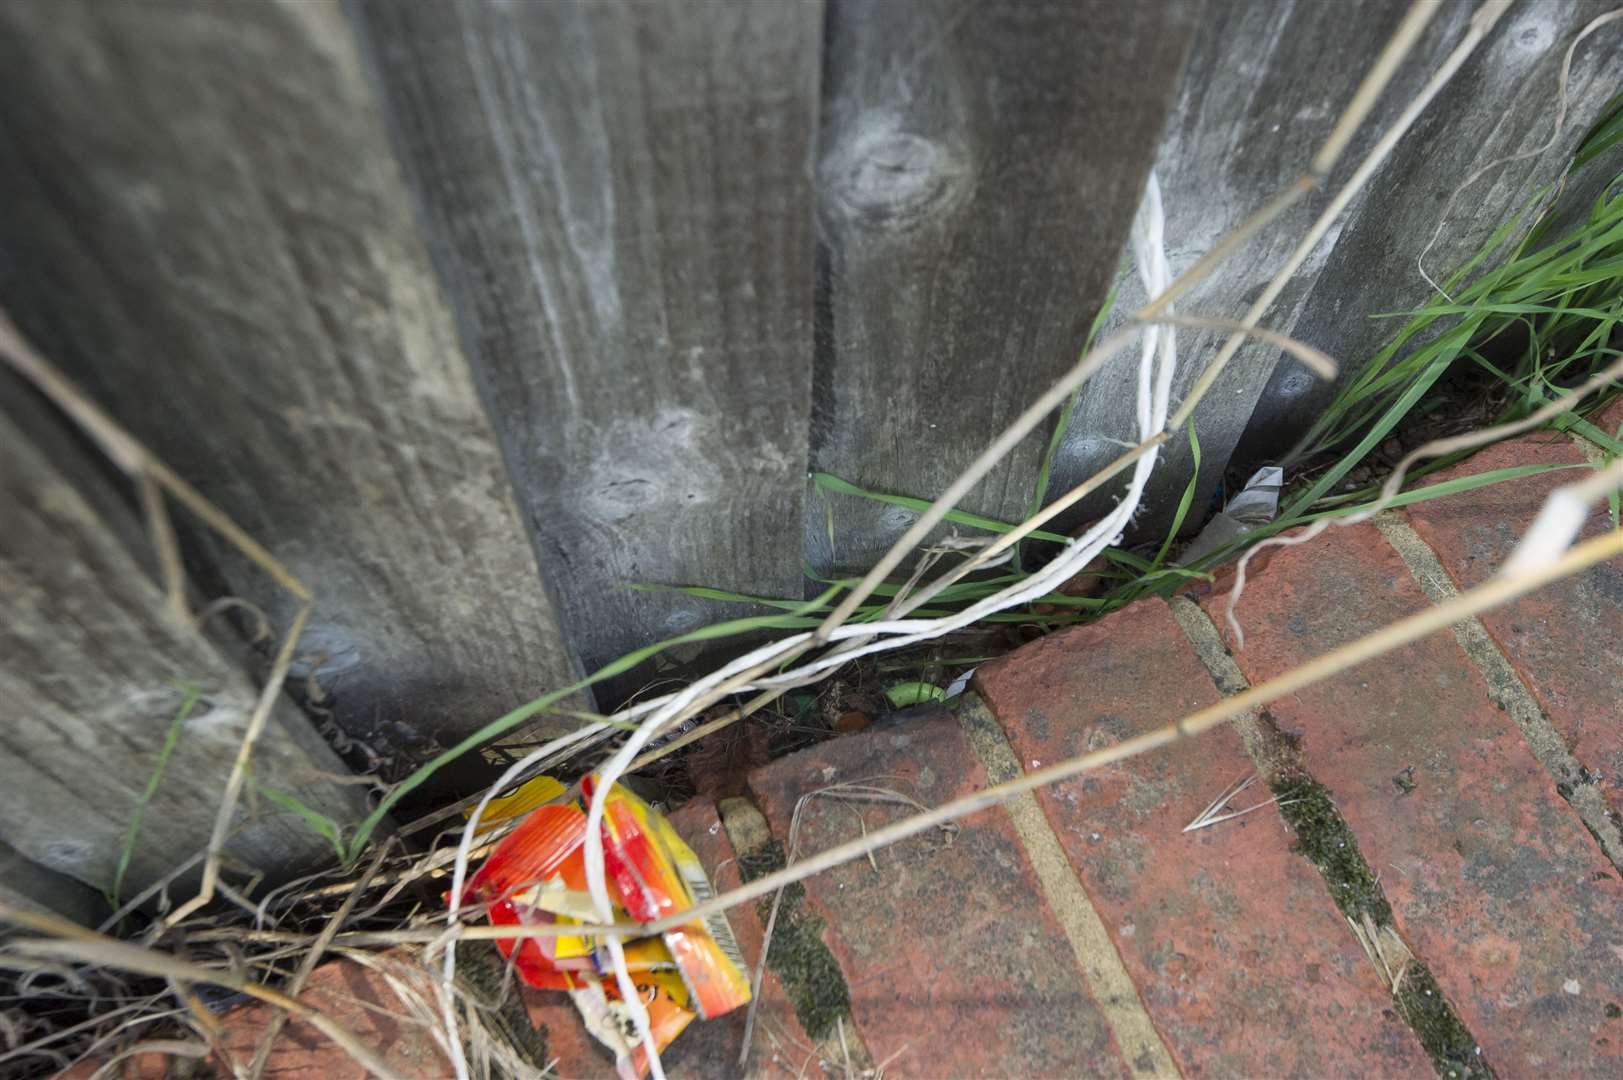 Needles are often found between the wall and fencing here at the junction of Littlebrook Manorway and Henderson Drive, Temple Hill